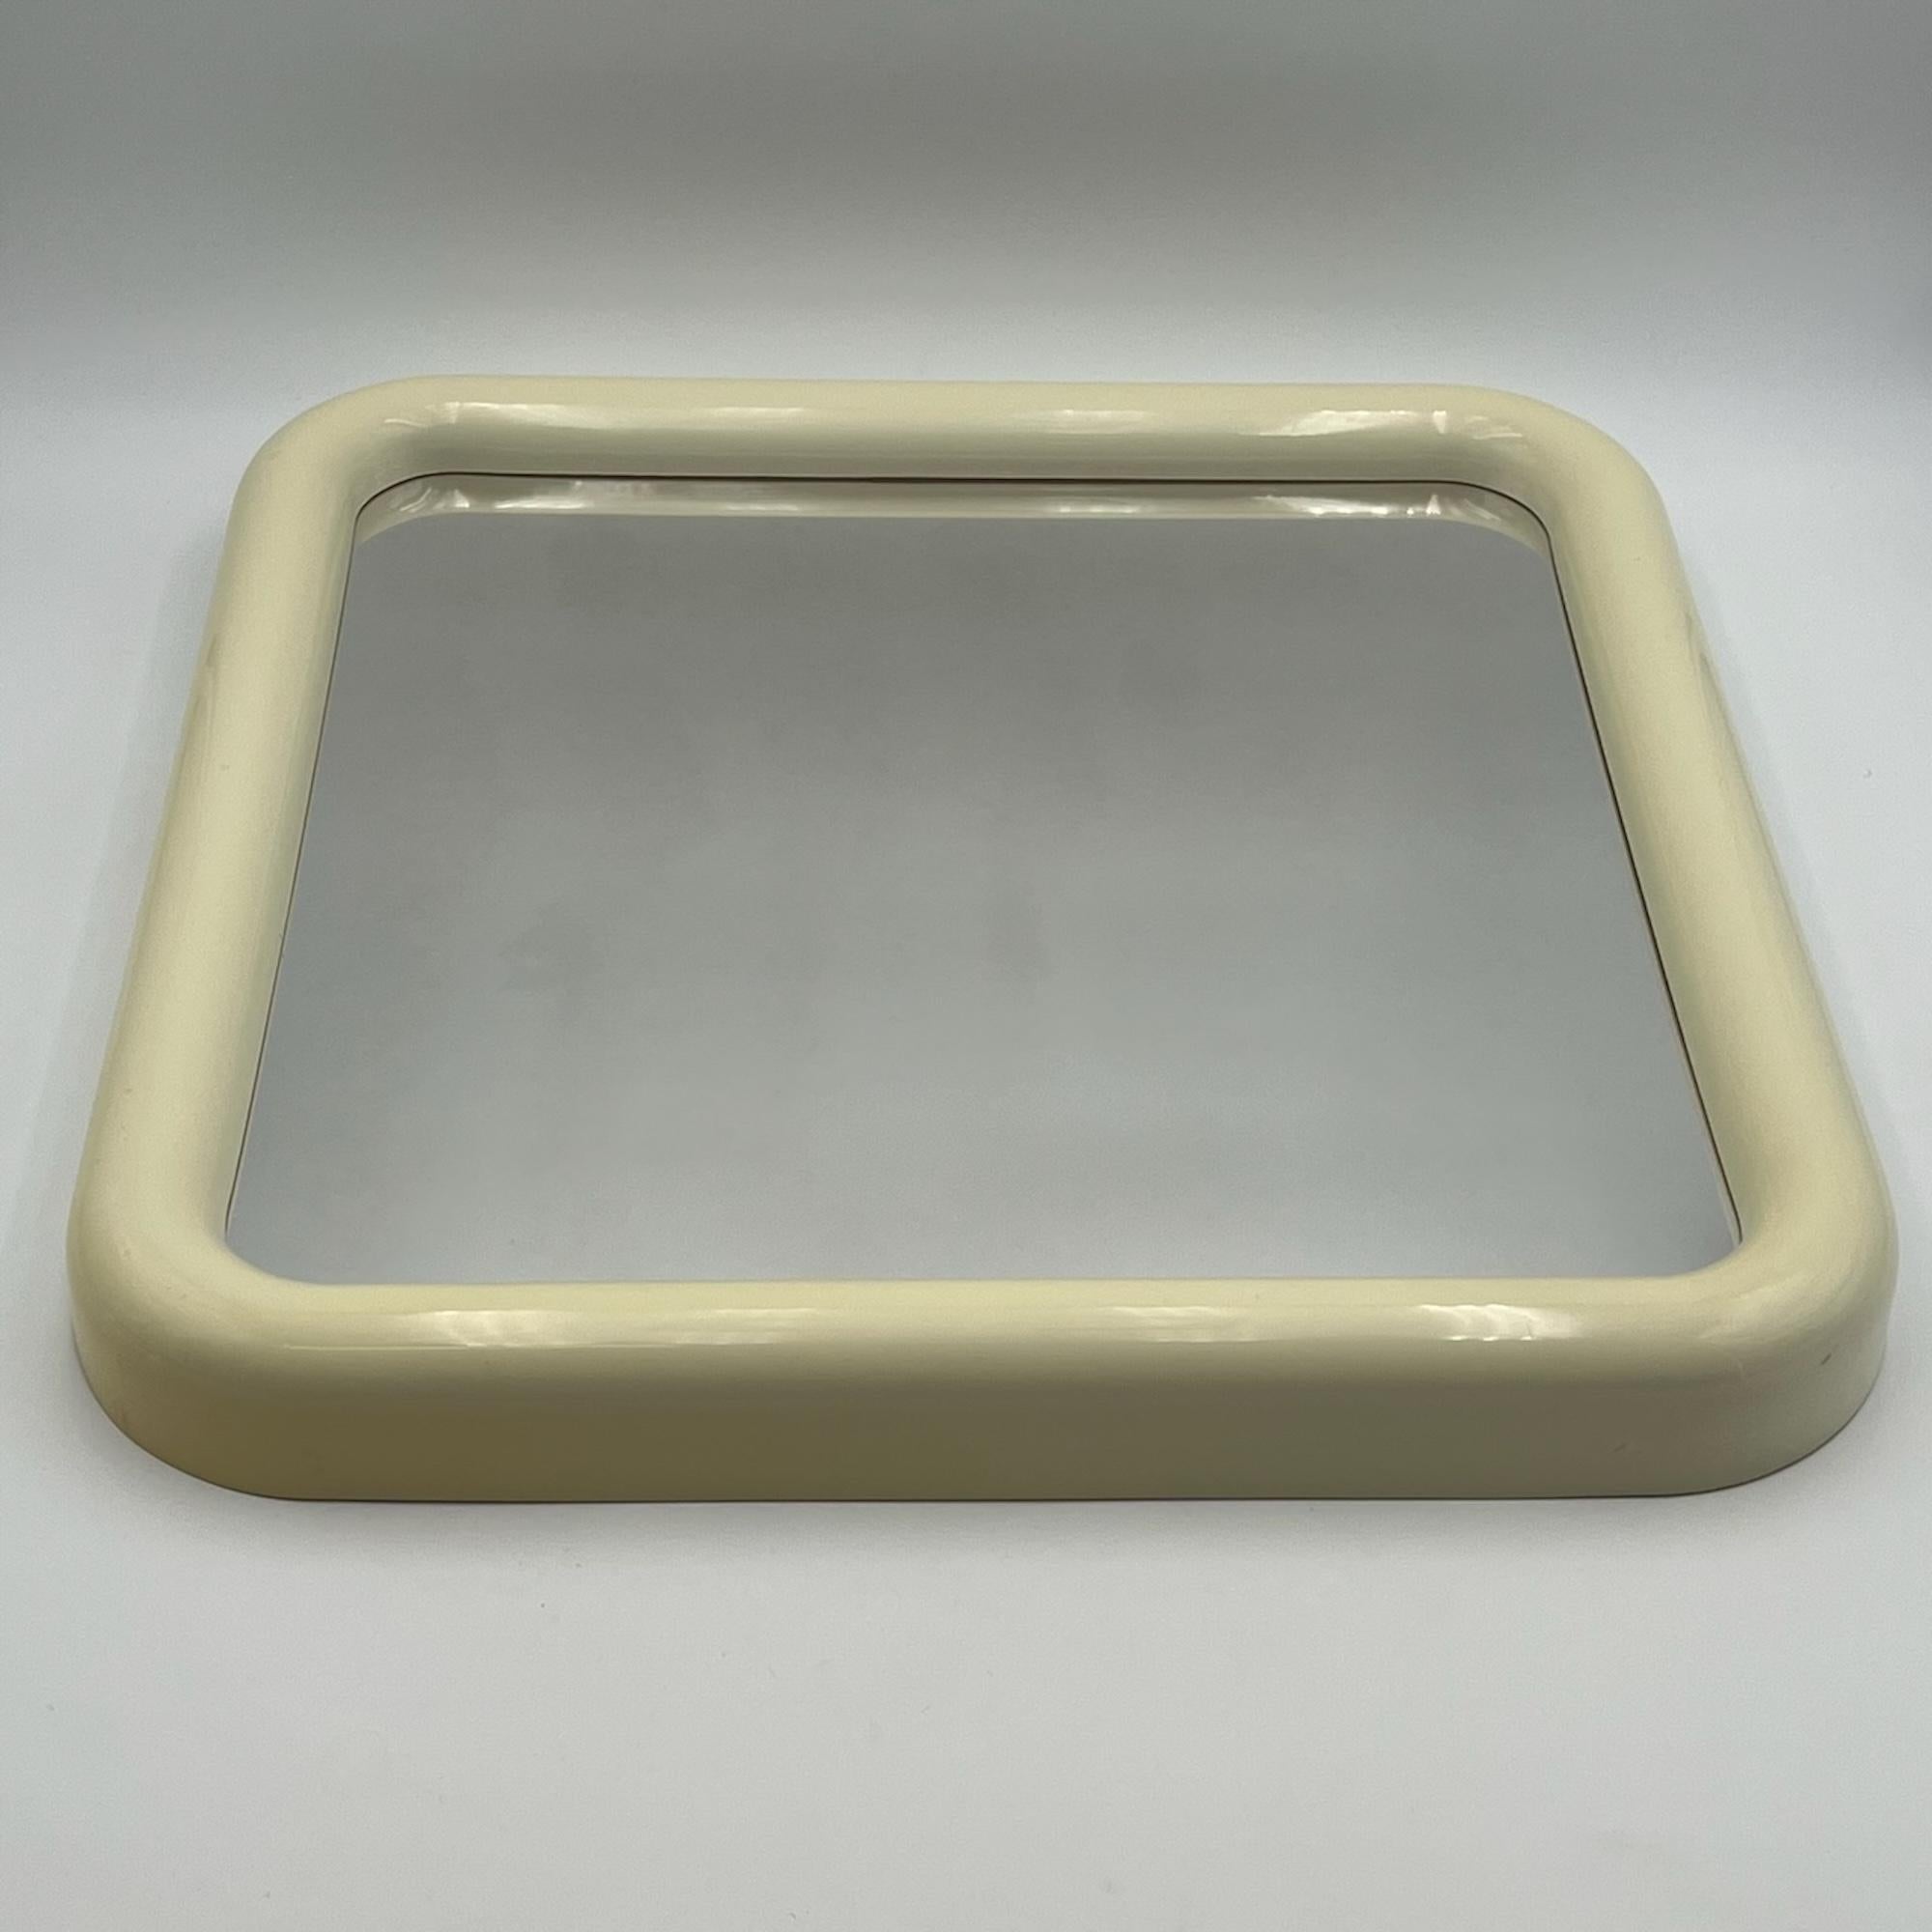 Beautiful space age plastic wall mirror with square frame and curved borders made in Italy in the 1960s.

The squared shape frame has thick and rounded borders, a signature of late 60s and early 70s Italian productions. The glossy plastic with its